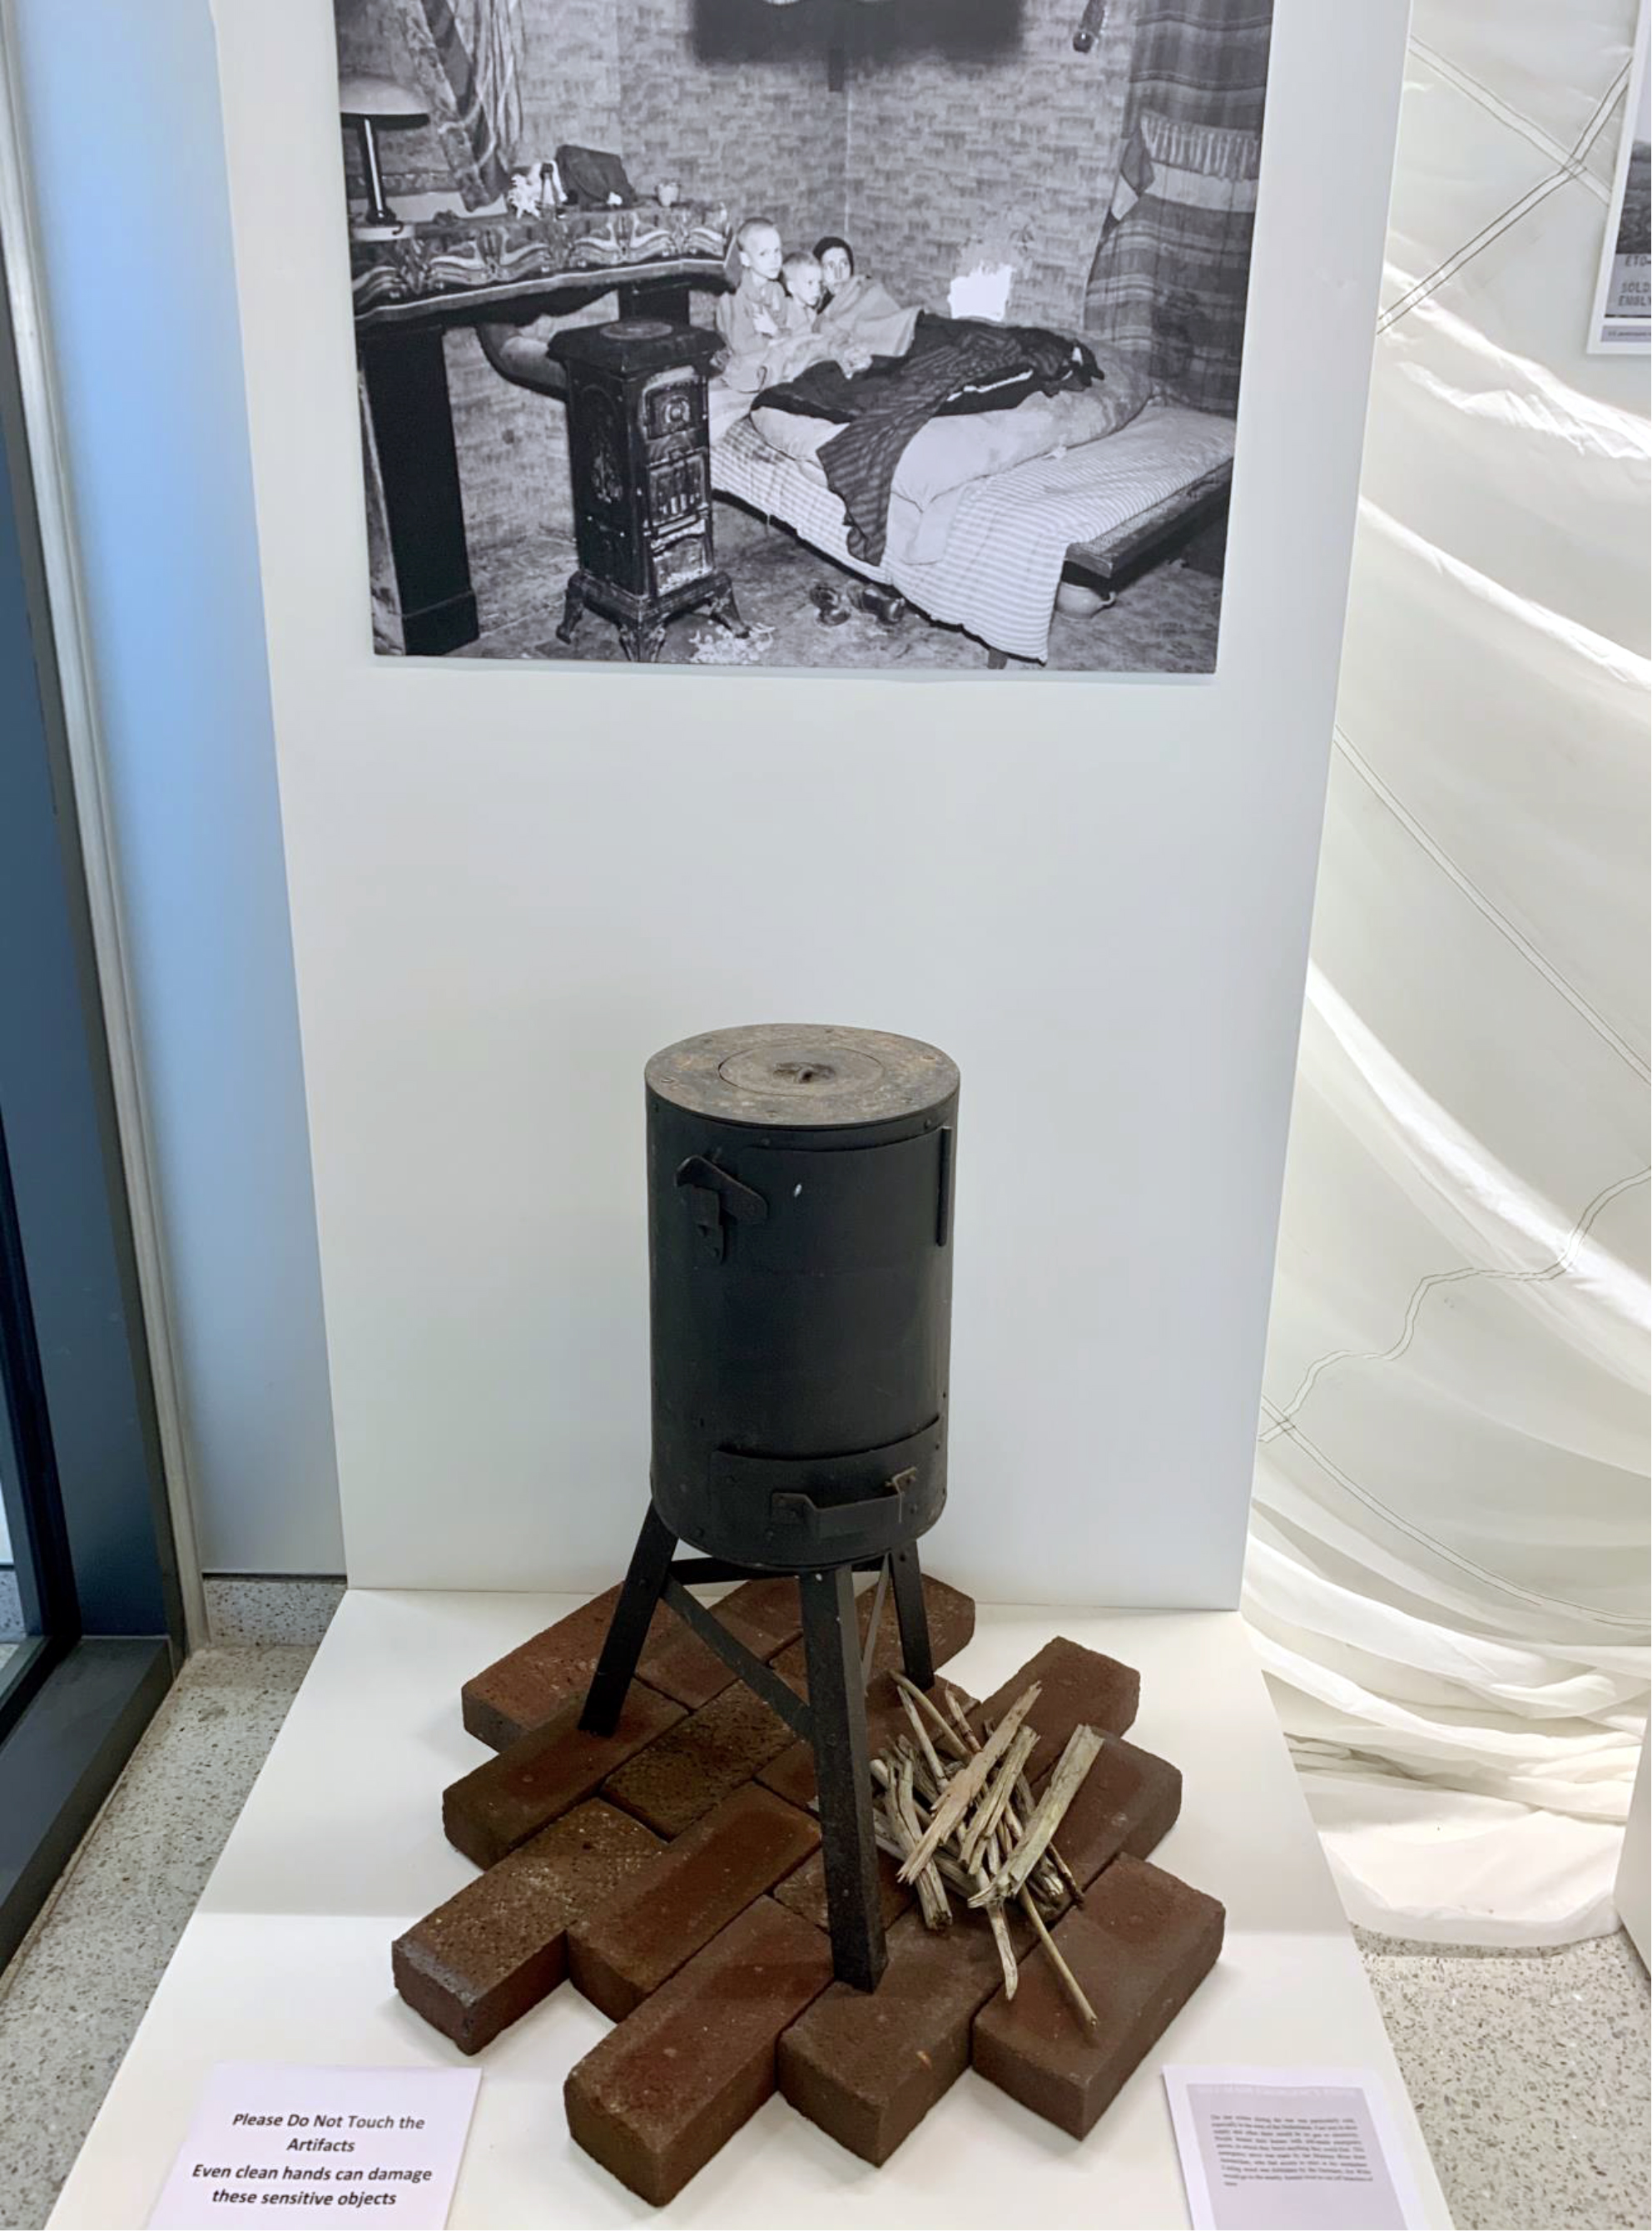 Color photograph, museum display of camp stove on loose bricks, with black and white photograph in background